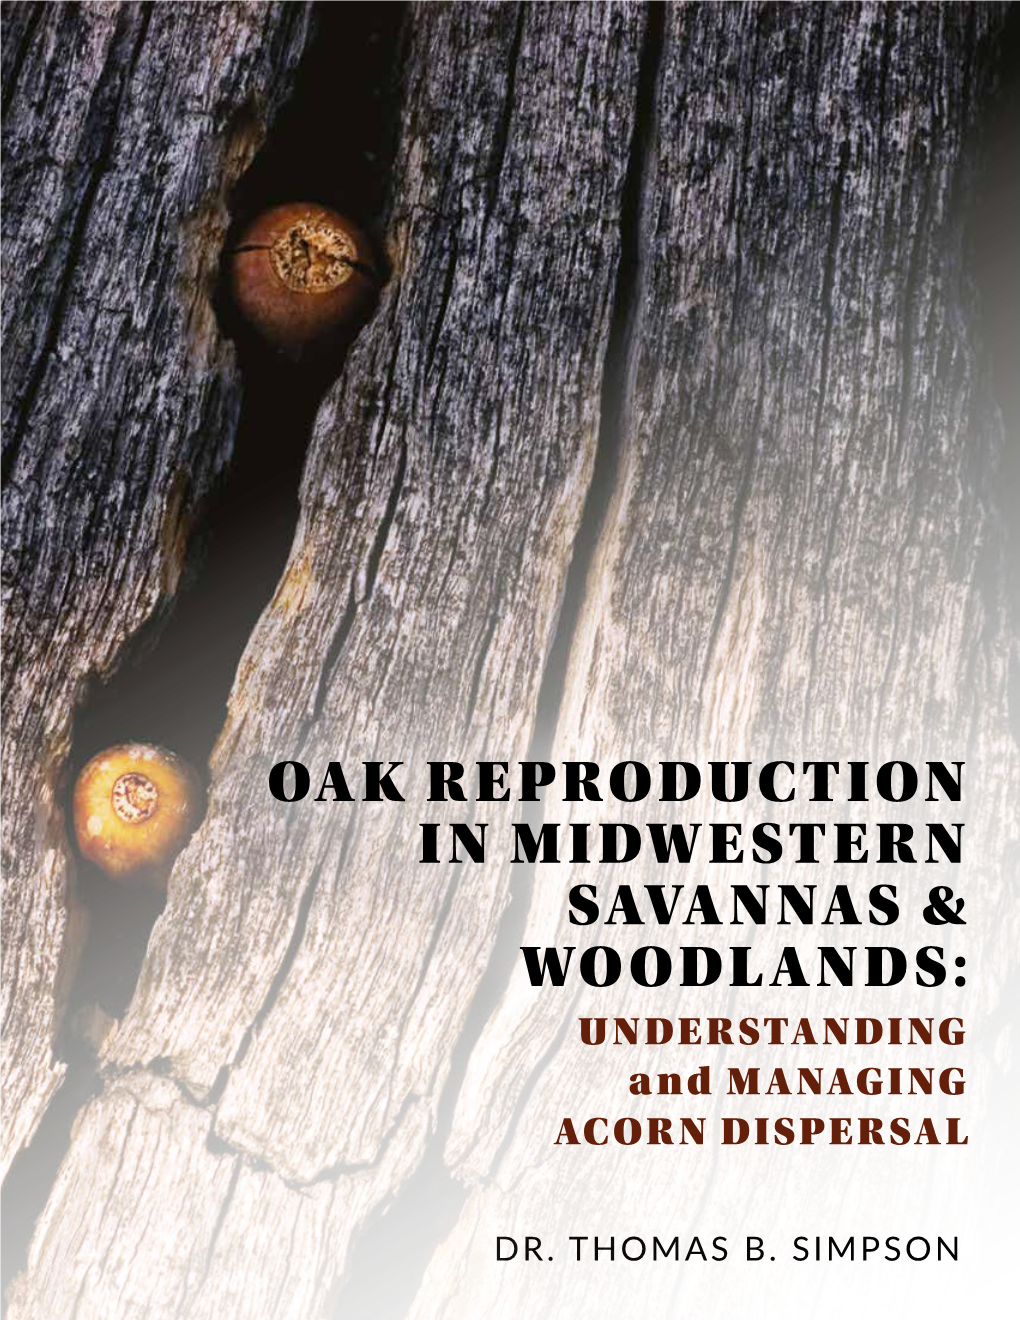 Oak Reproduction in Midwestern Savannas and Woodlands Vol. 1.Pdf